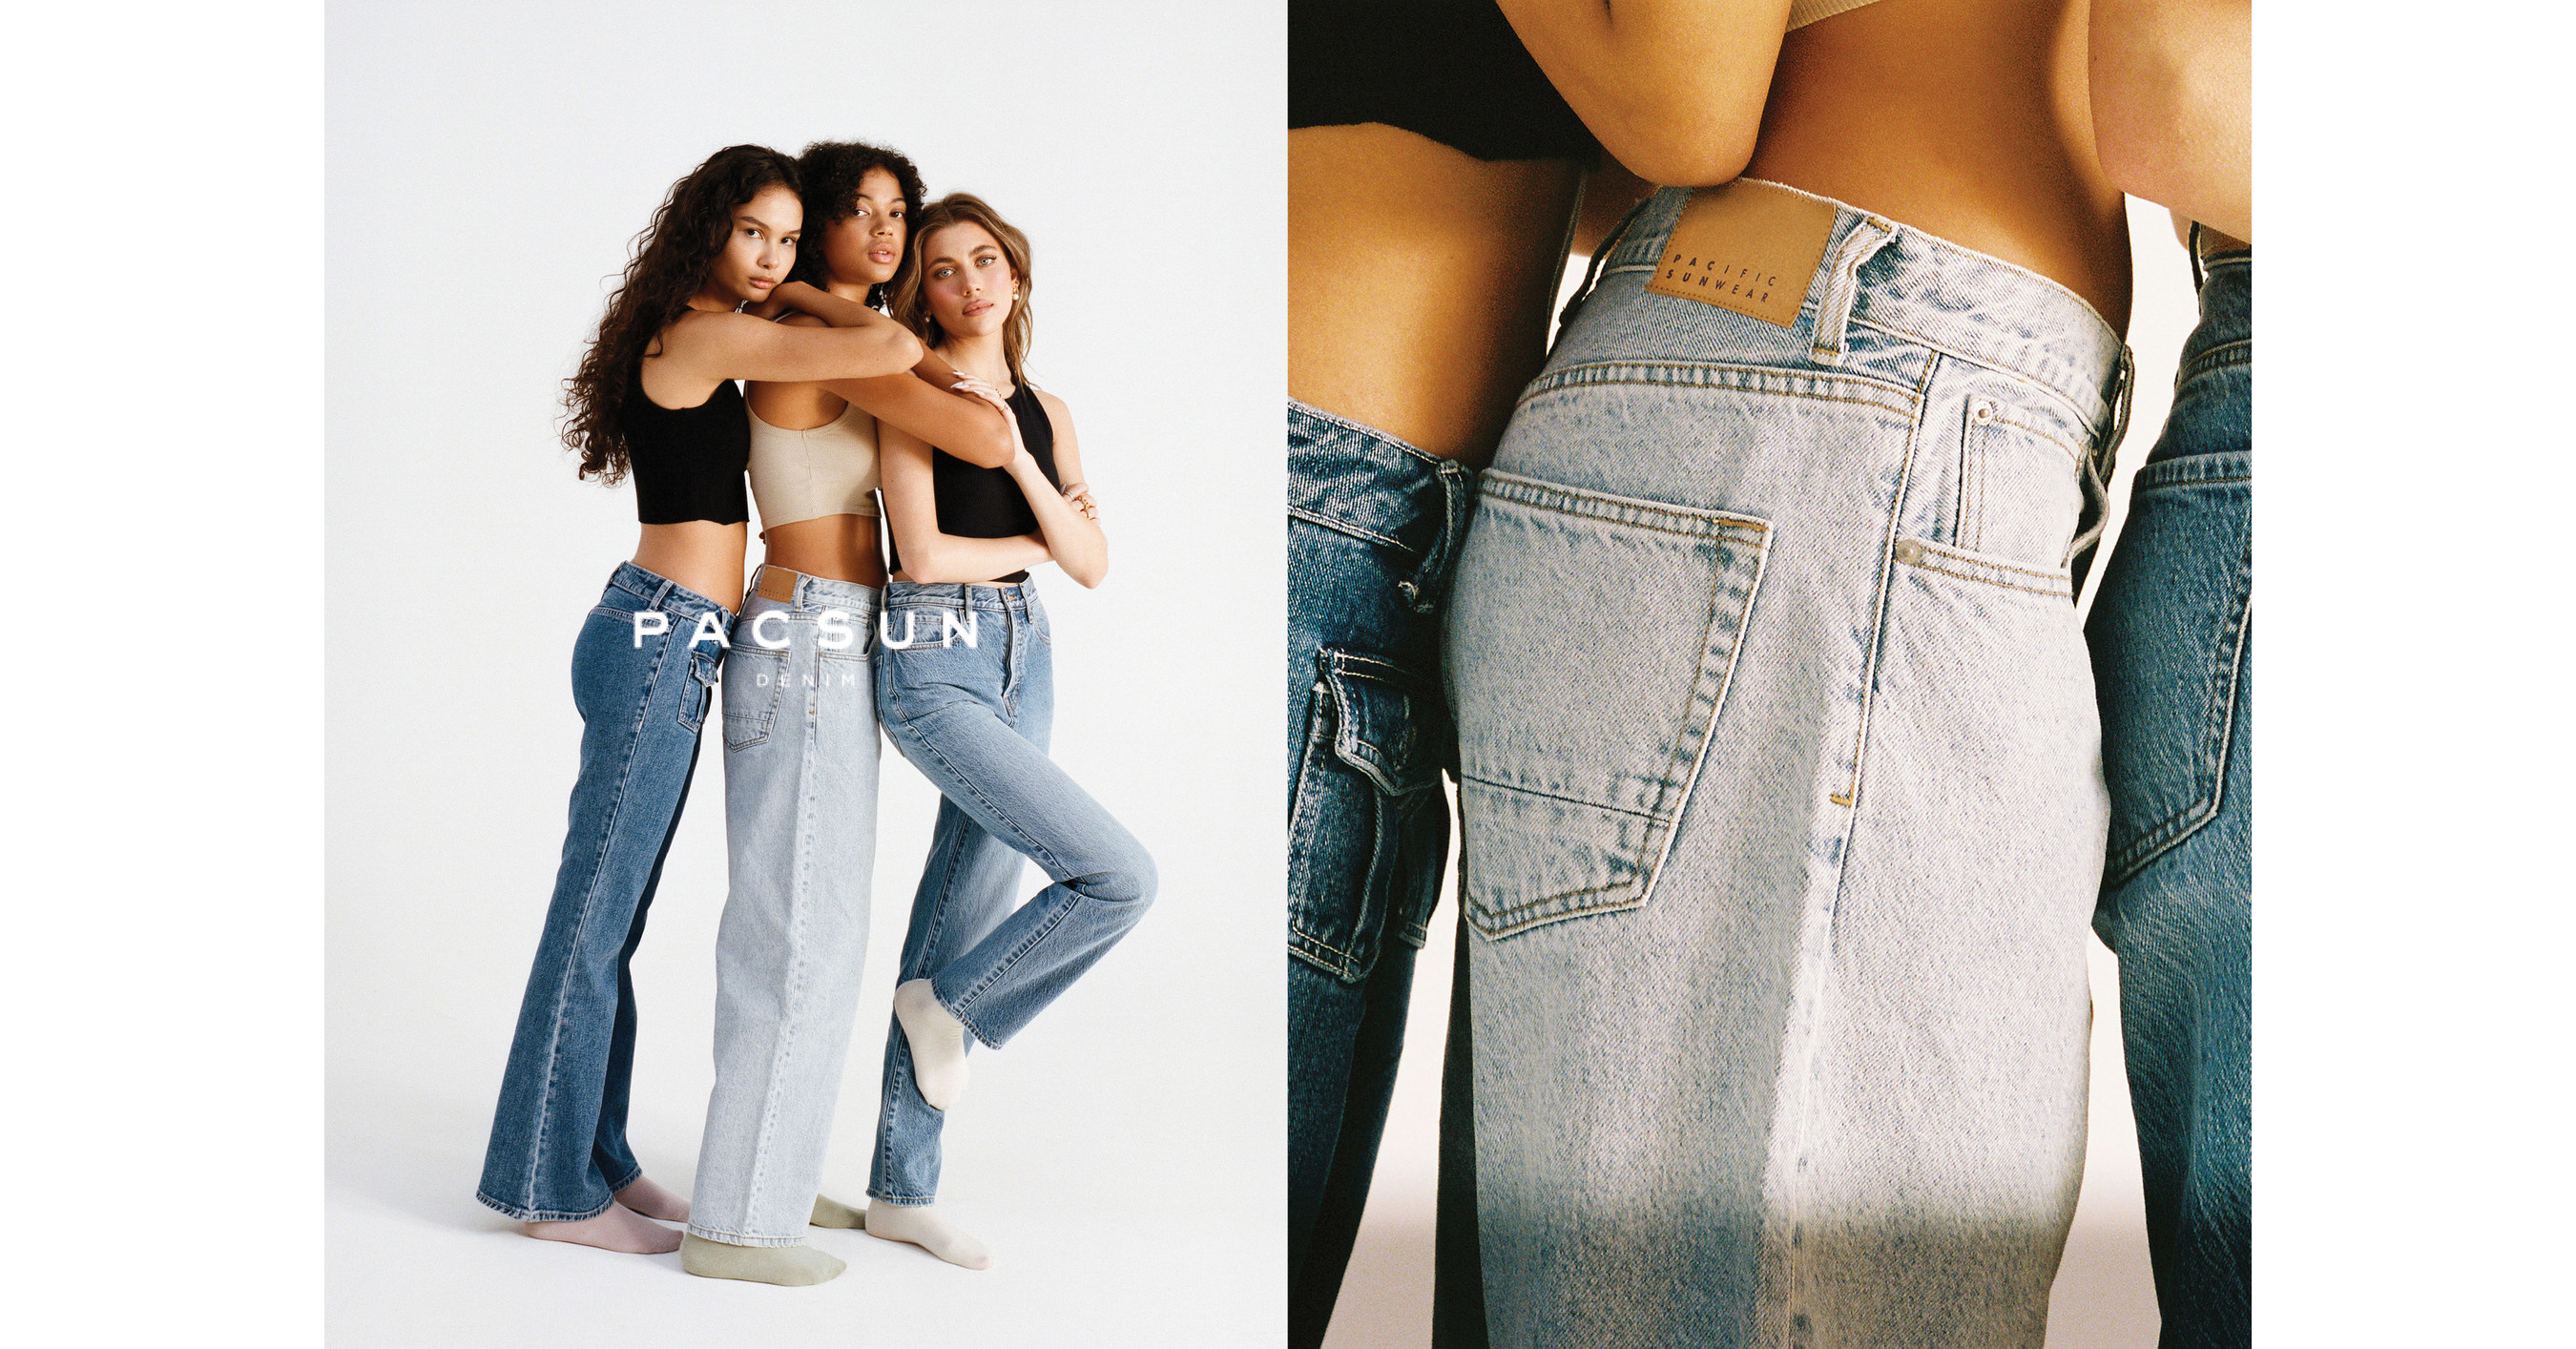 PACSUN LAUNCHES ALL NEW DENIM IN 2022 BACK-TO-SCHOOL CAMPAIGN